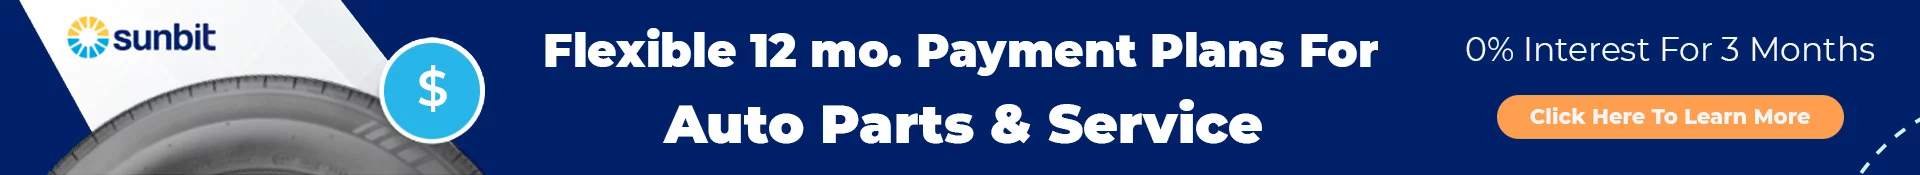 Payment Plans for Auto Parts and Service at Commonwealth Nissan